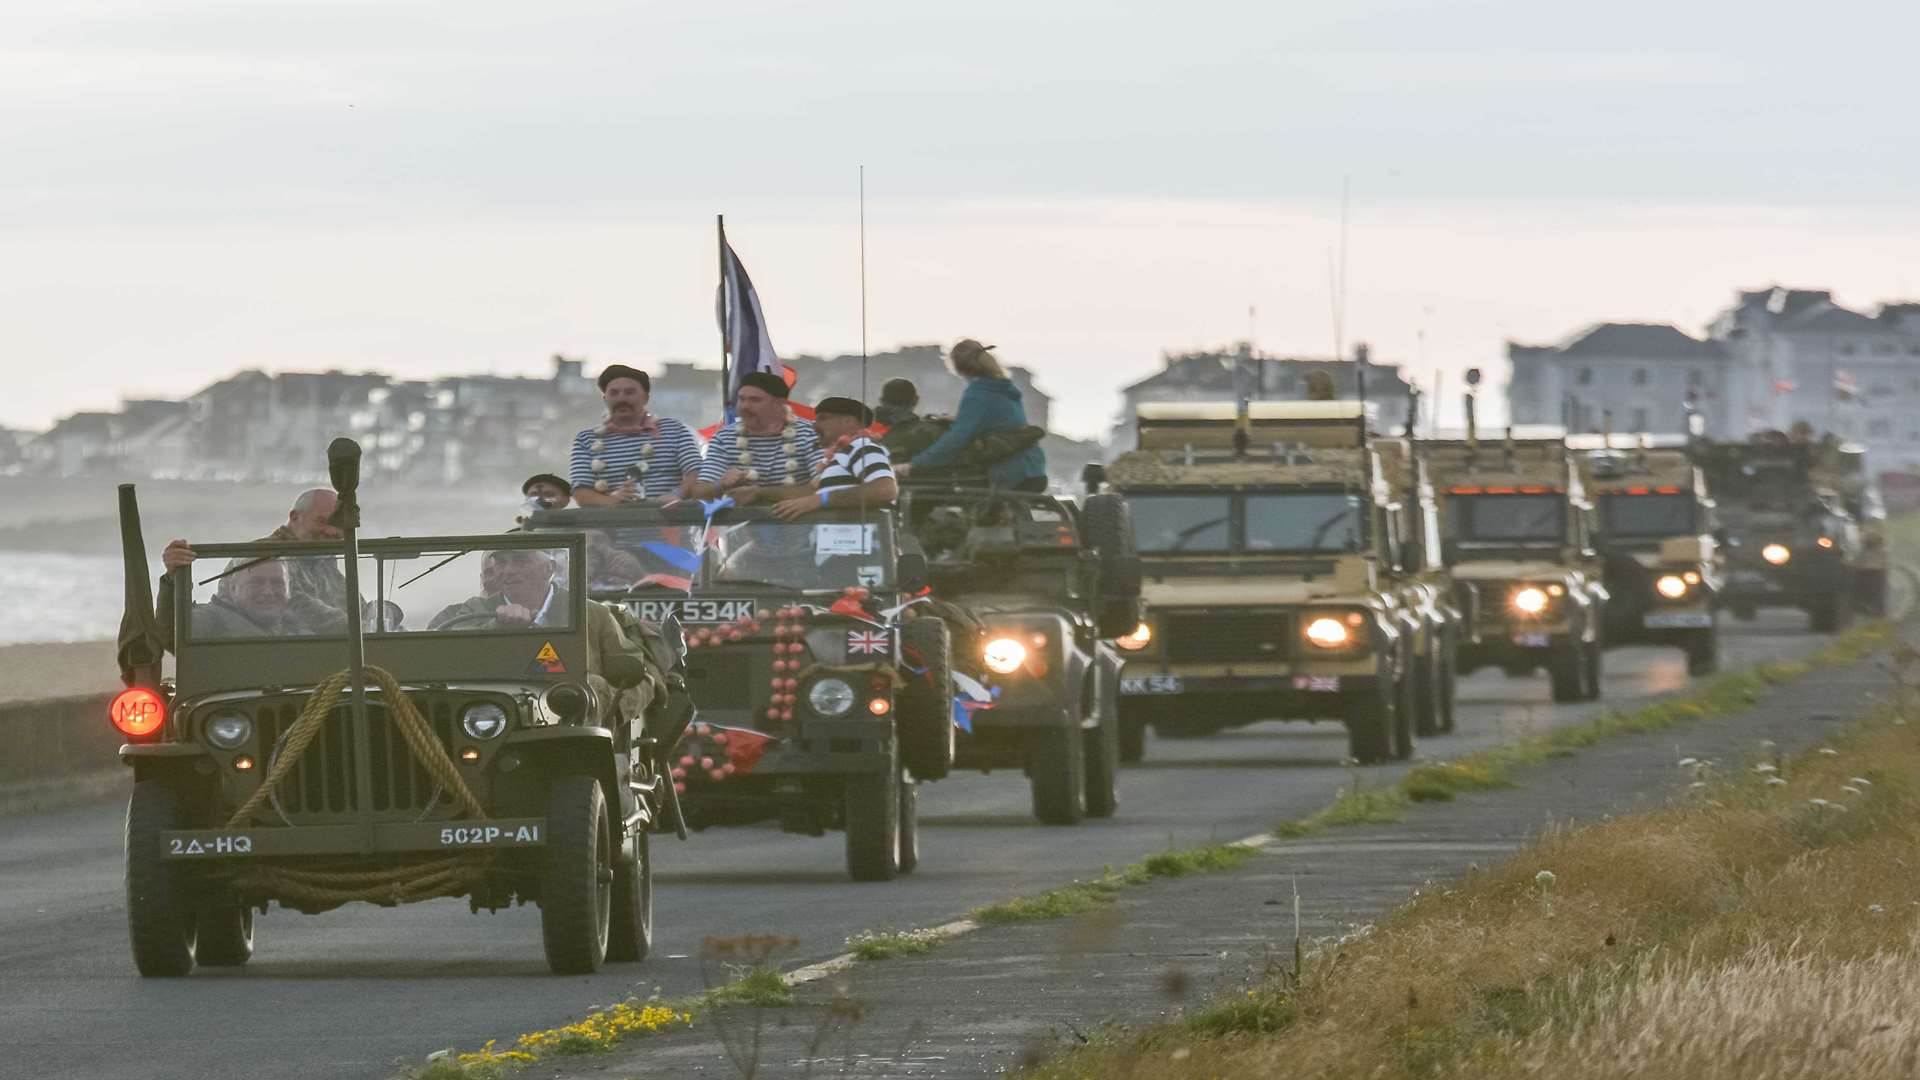 Vehicles on their way to the War and Peace Revival